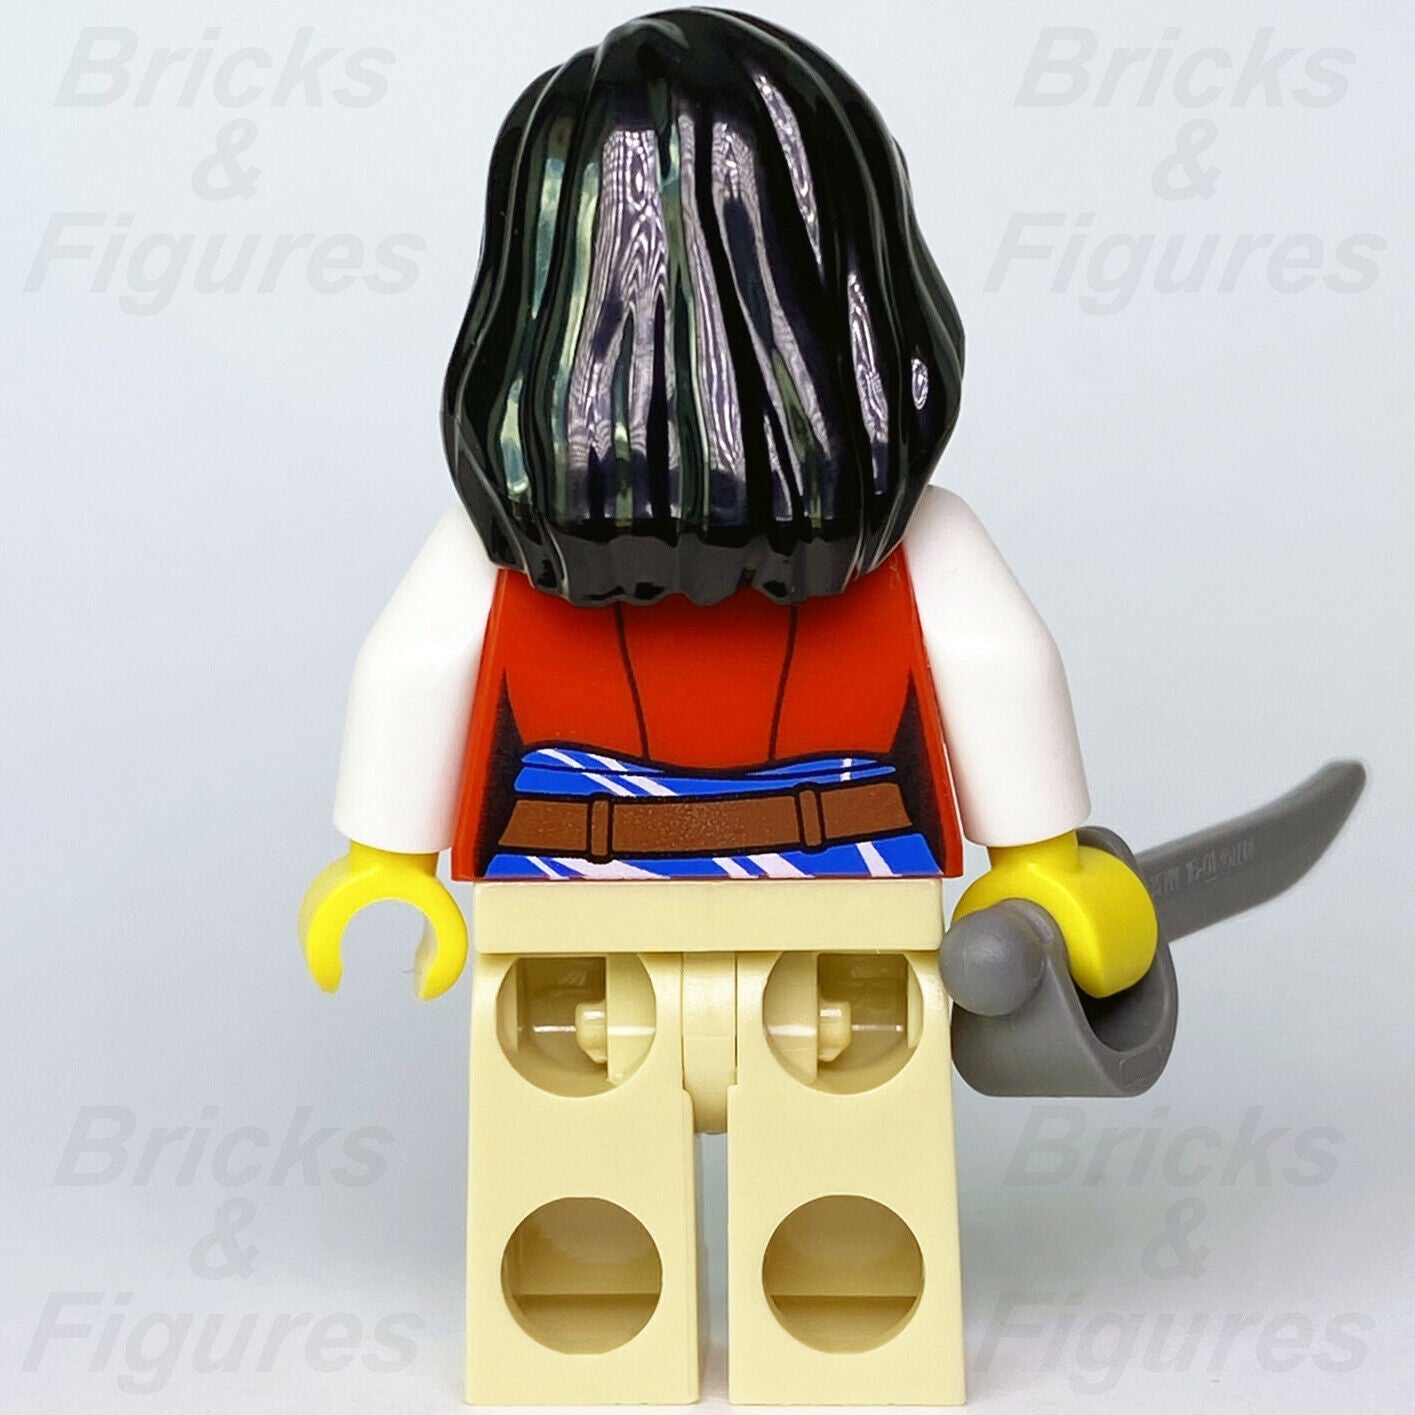 New Ideas LEGO Lady Anchor Pirates Minifigure with Sword from set 21322 idea067 - Bricks & Figures